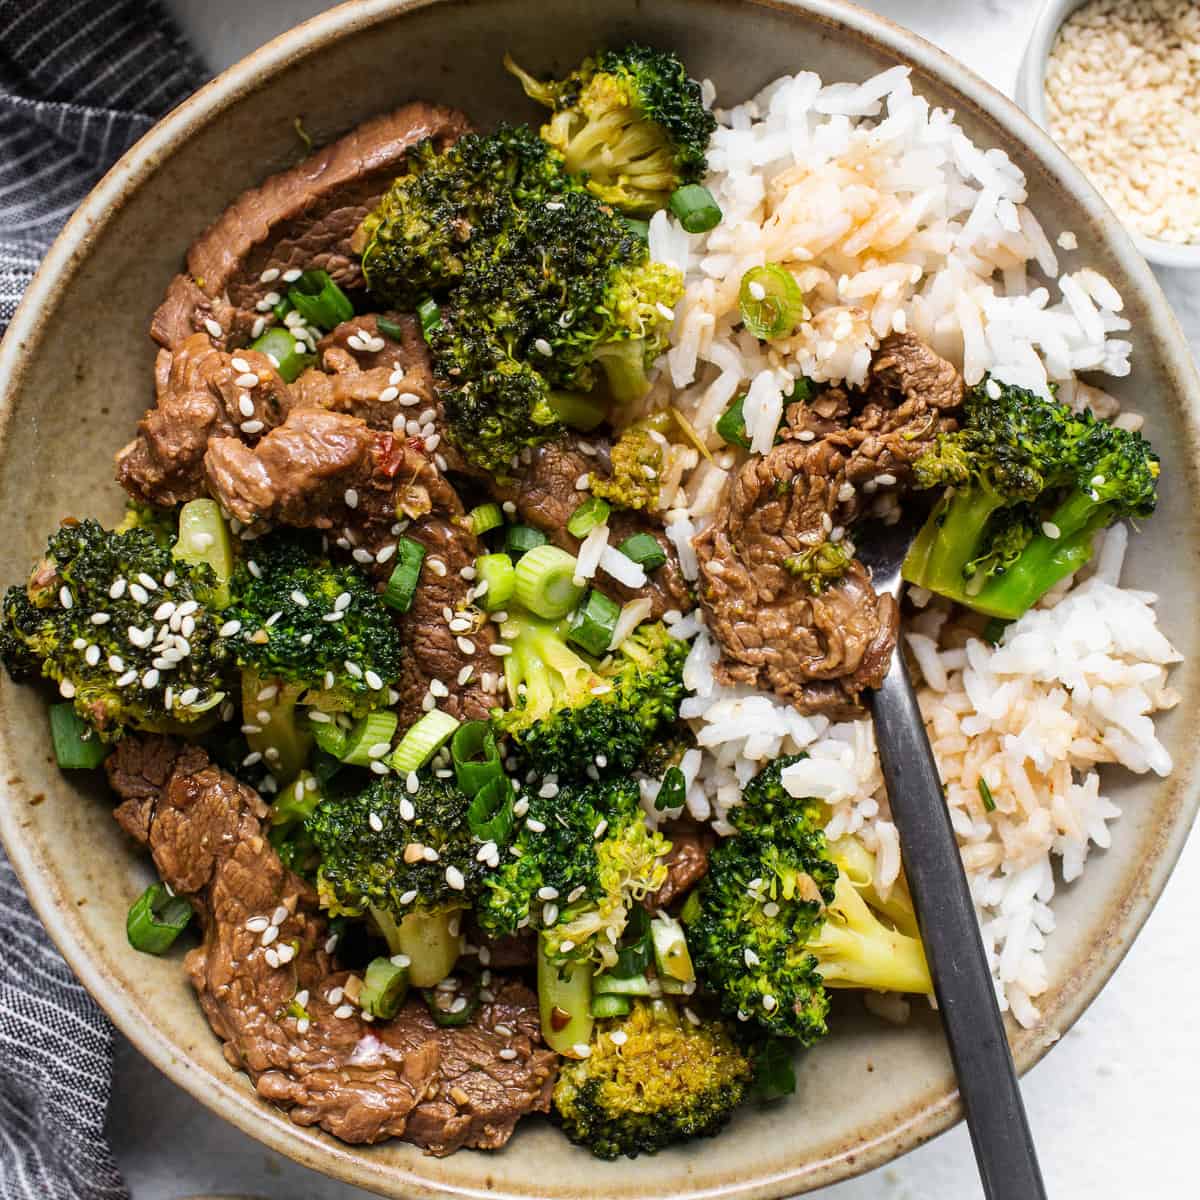 https://fitfoodiefinds.com/wp-content/uploads/2023/02/Instant-Pot-Beef-and-Broccoli-04-3.jpg